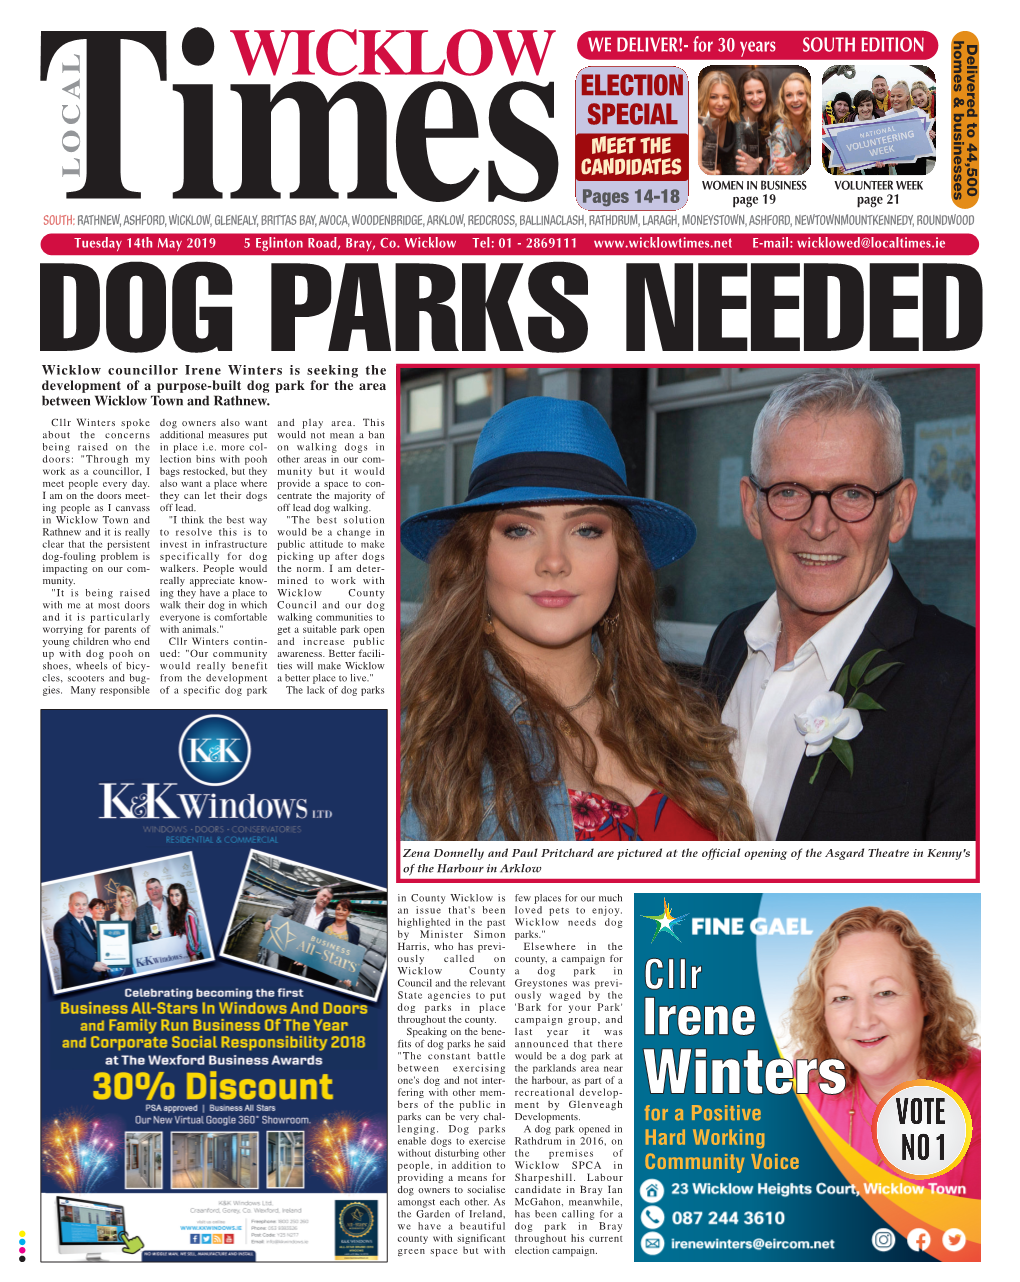 Wicklow Times 14-5-19 South